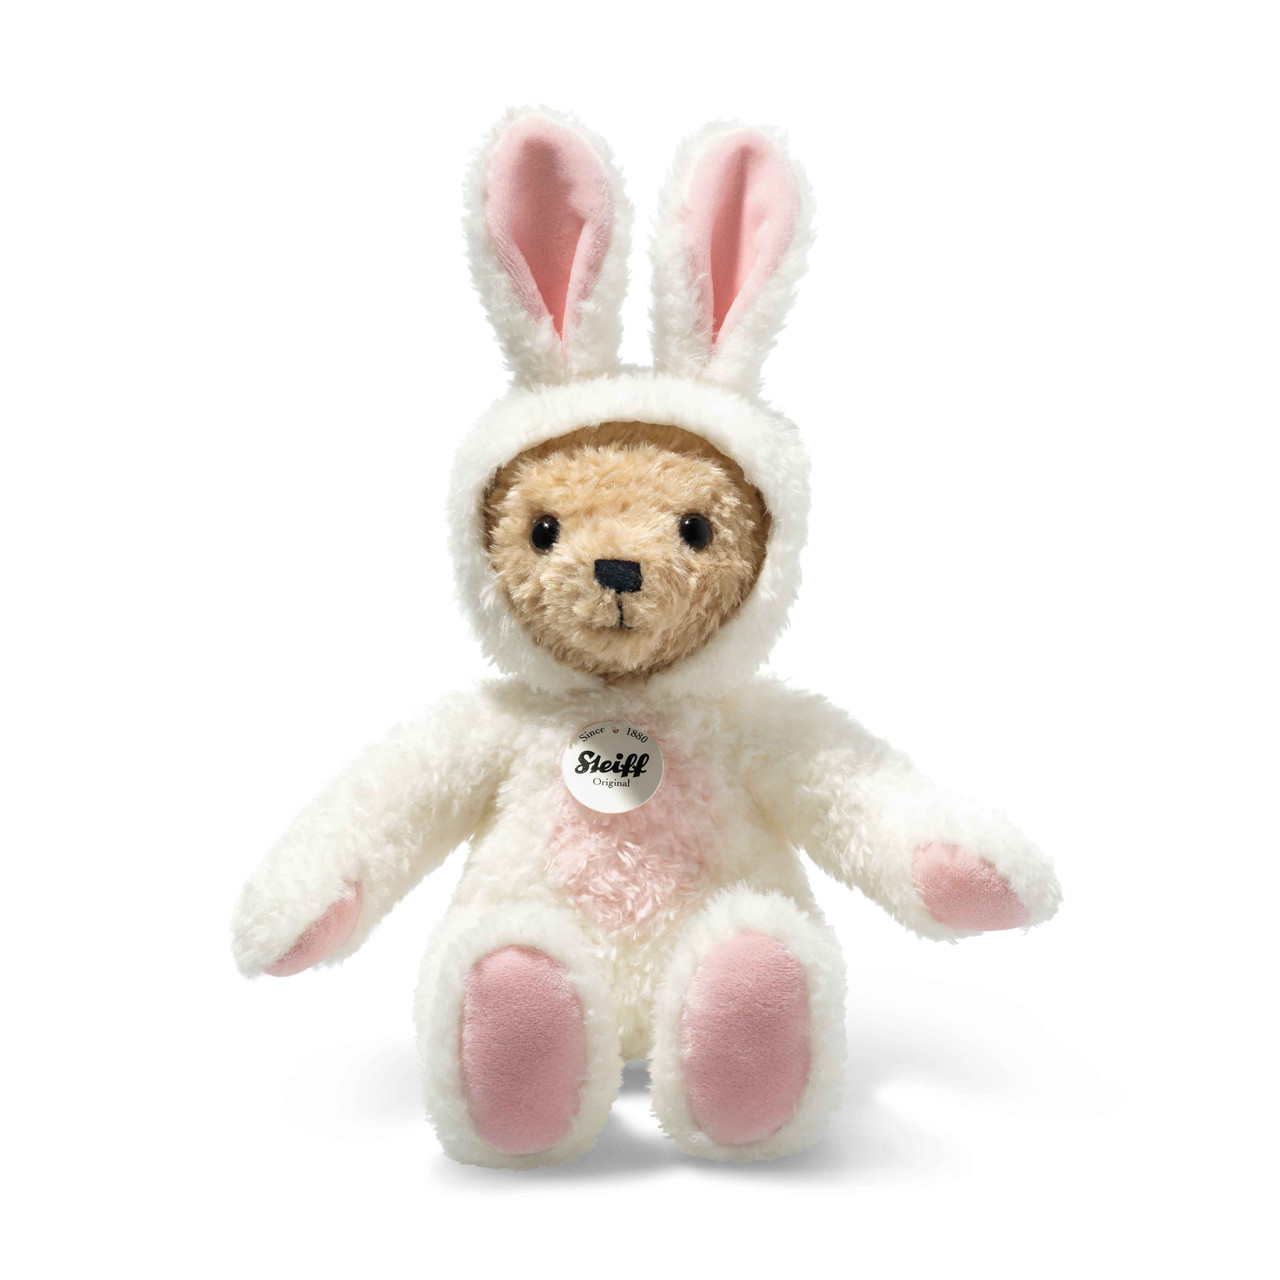 Year of the Rabbit" Teddy Bear - Steiff - Free Shipping over $50